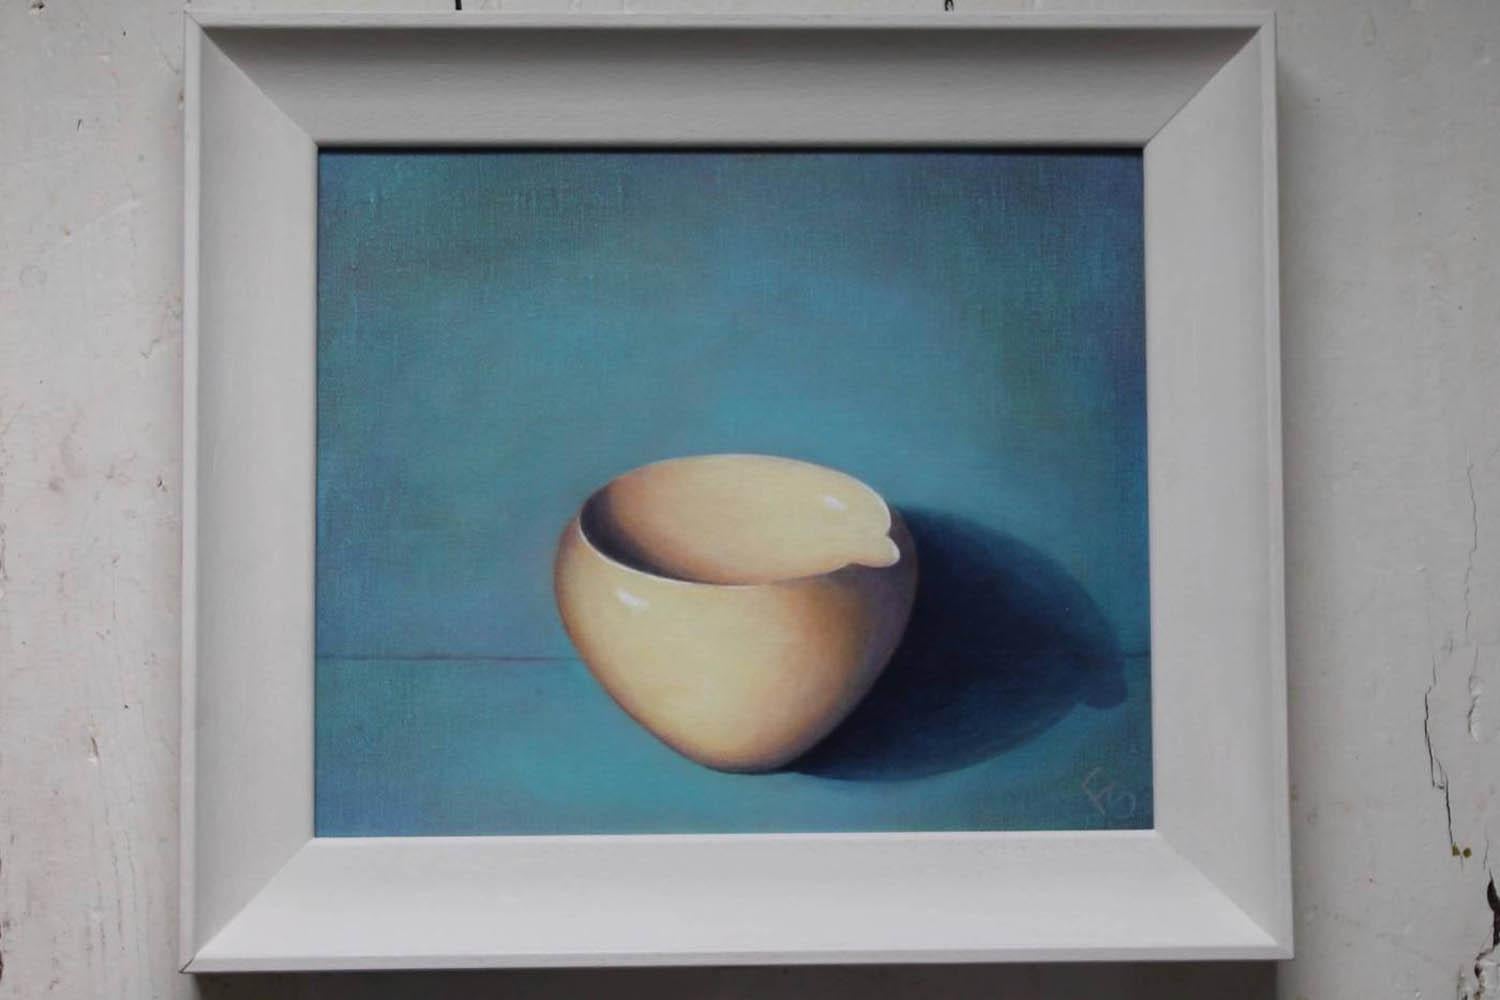 Please note that insitu images are purely an indication of how a piece may look

Mother’s Bowl 1 is a contemporary still life painting by Fiona Smith. The delicate tones and Smith’s use of shadow makes this a calming piece to look at.

Fiona Smith